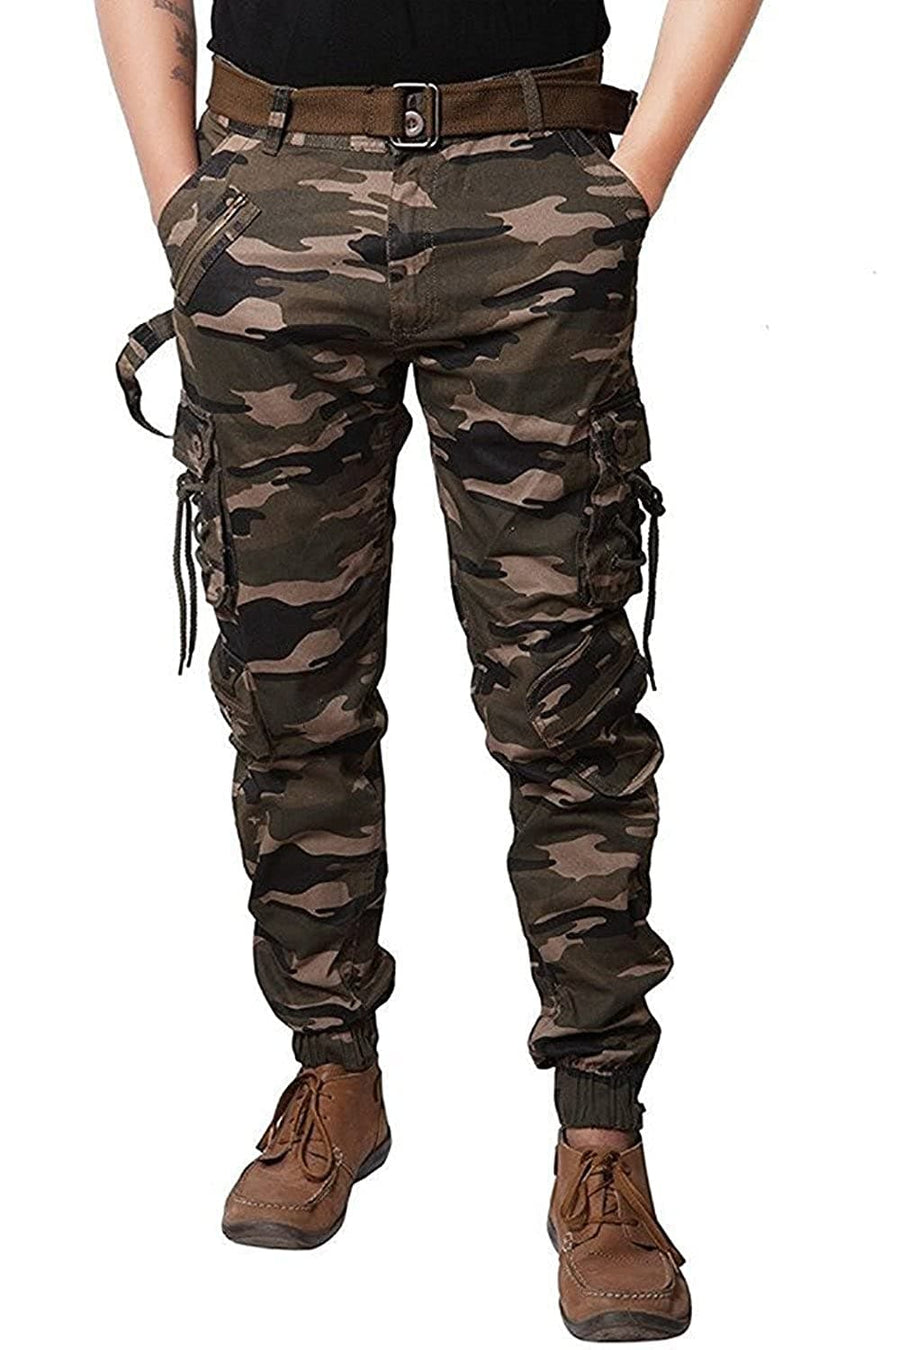 Camouflage Camo Military Cotton Long Cargo Pants Trousers with Belt ...